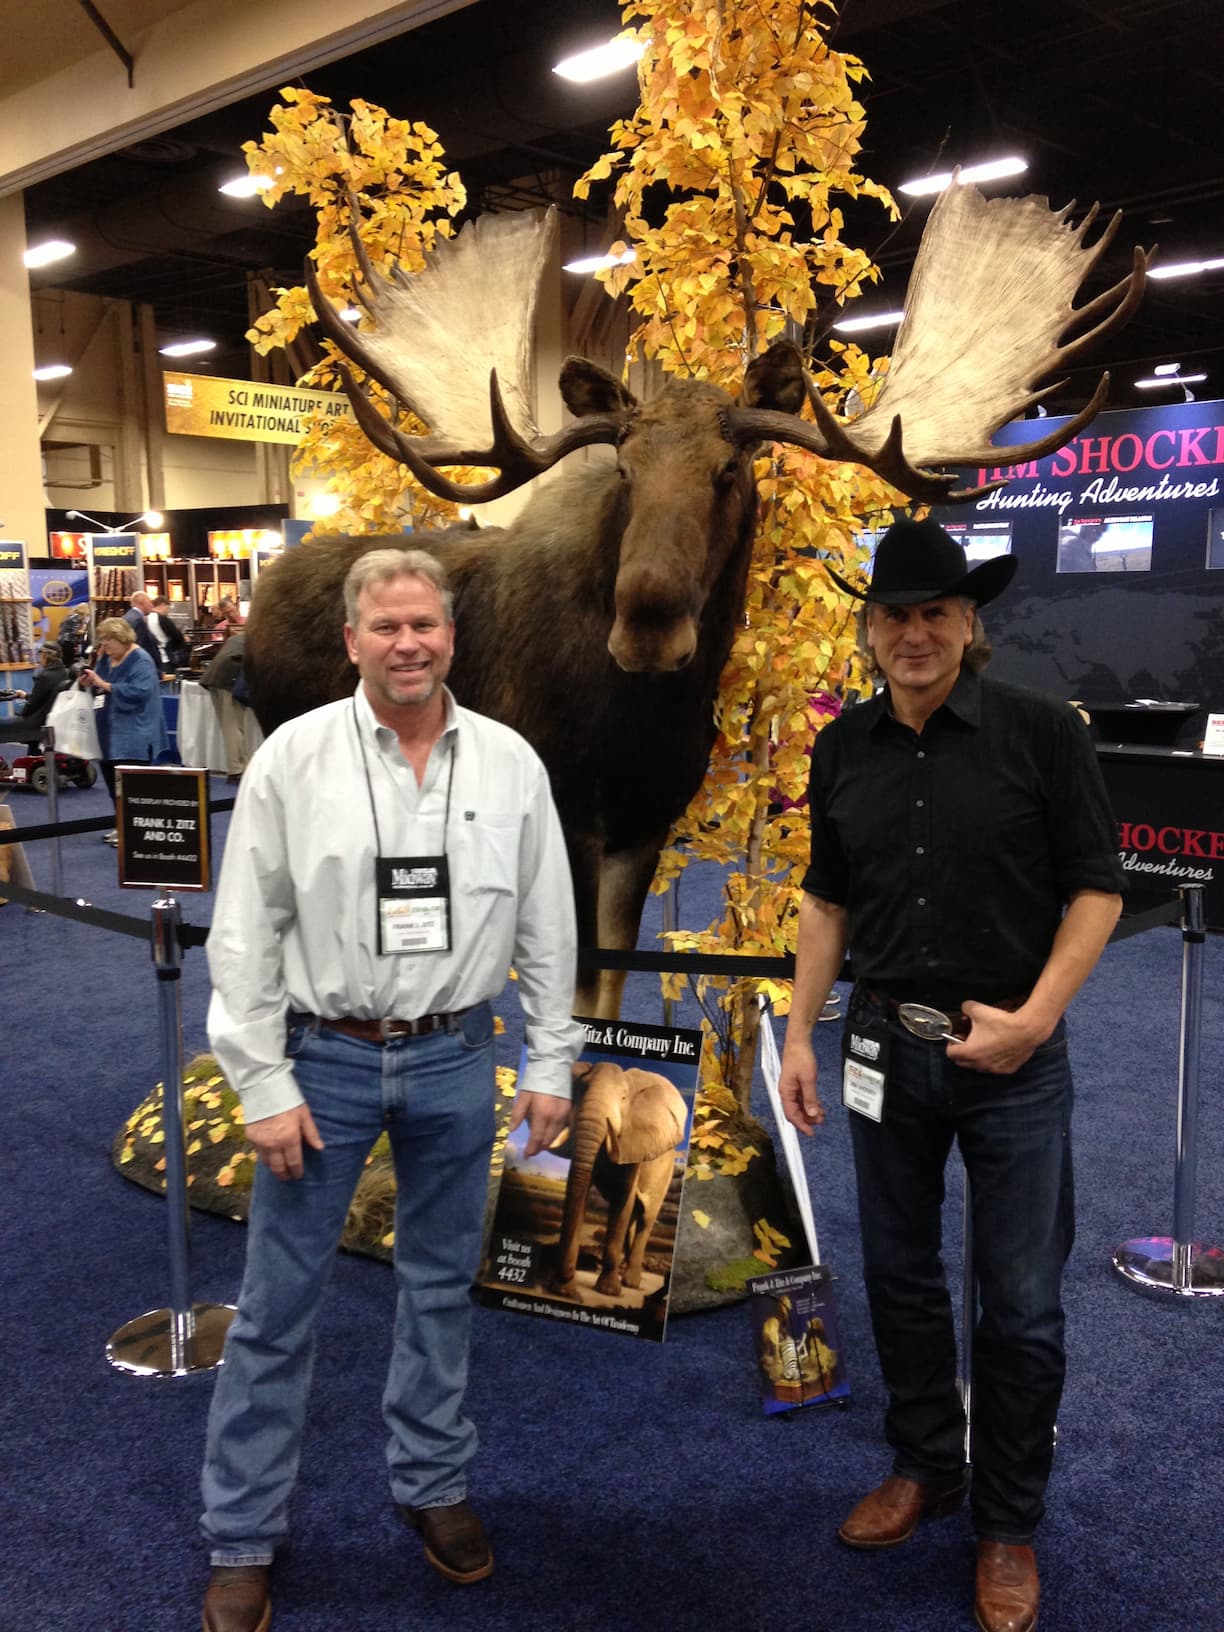 Frank Zitz (on right) and Jim Shockey (on left) SCI booth in Vagas